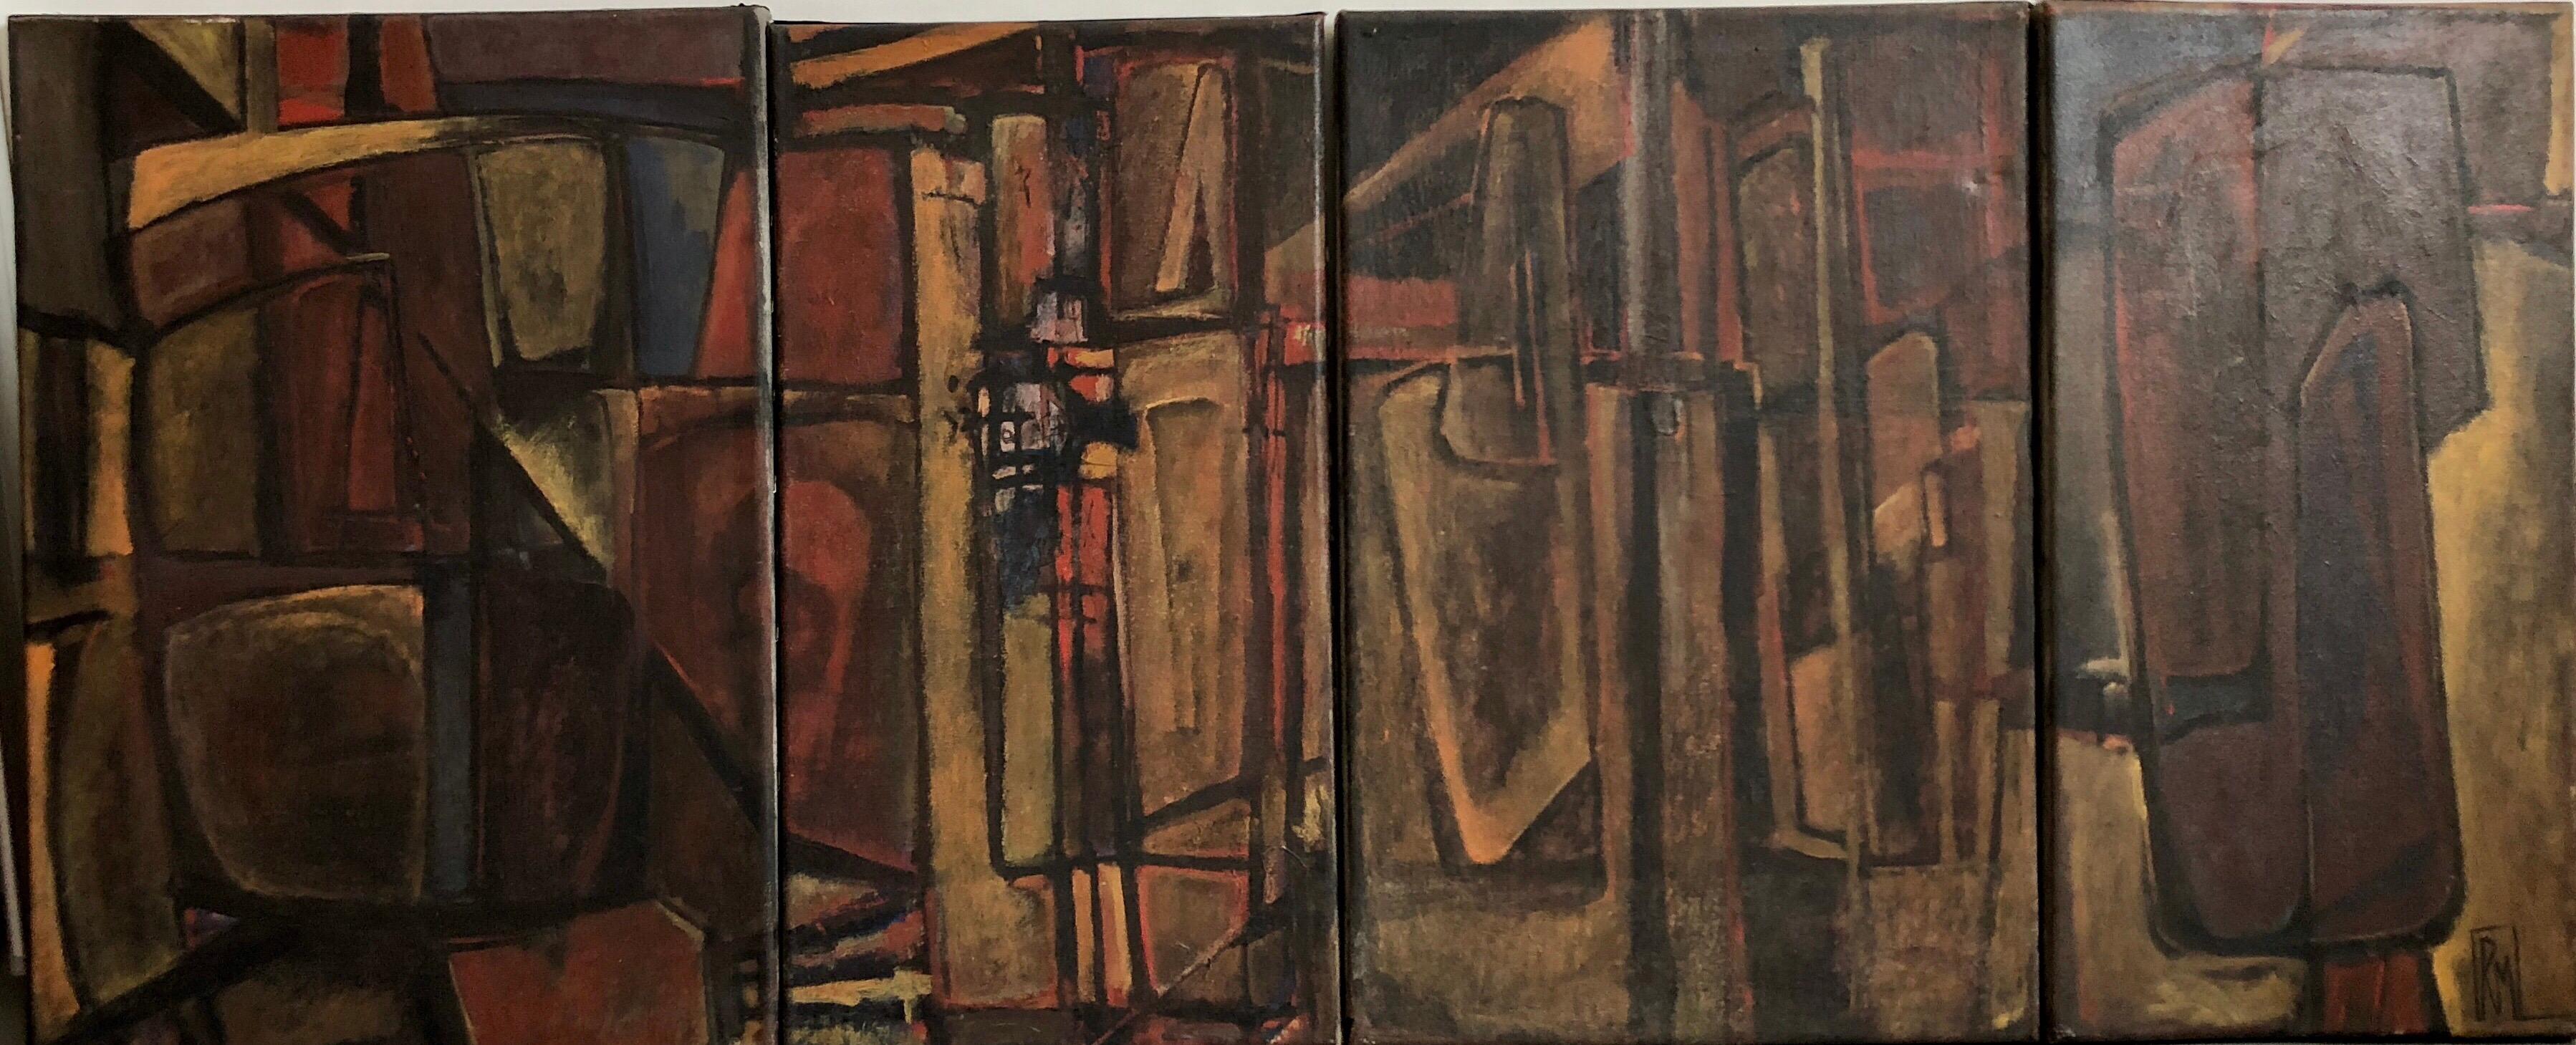 Rebeca Mendoza Abstract Painting - Argentine Abstract Constructivist Quadriptych Oil Painting Latin American Woman